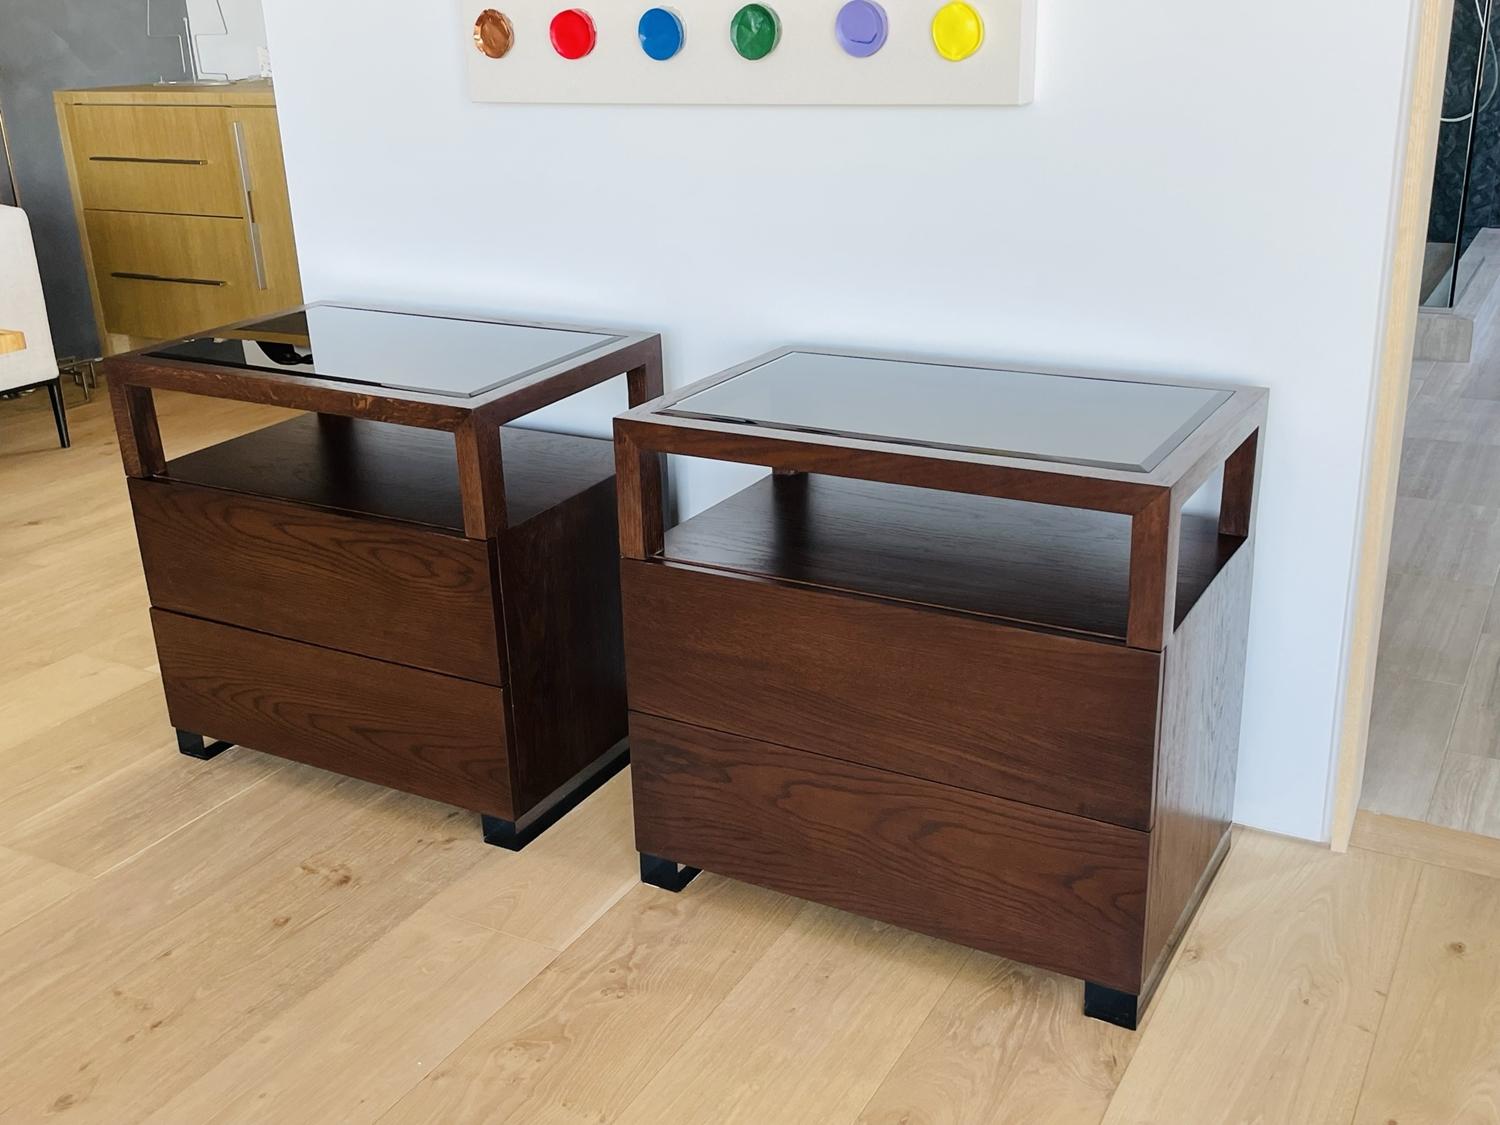 Post-Modern Pair of Nightstands by Cain Modern Made in Solid Oak and Bronzed Lucite For Sale